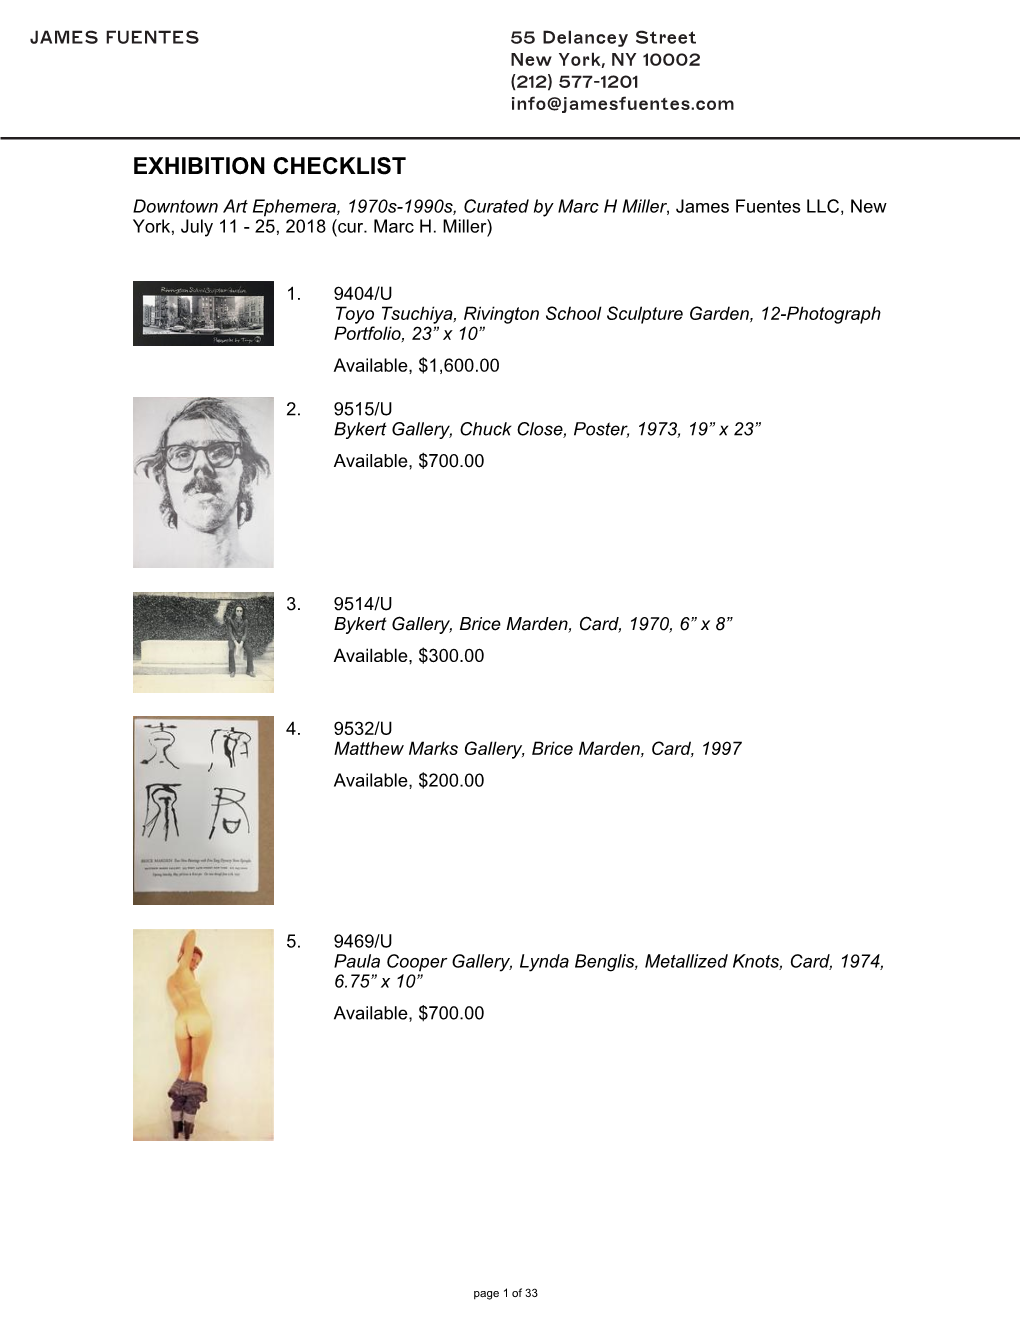 Downtown Art Ephemera, 1970S-1990S, Curated by Marc H Miller, James Fuentes LLC, New York, July 11 - 25, 2018 (Cur